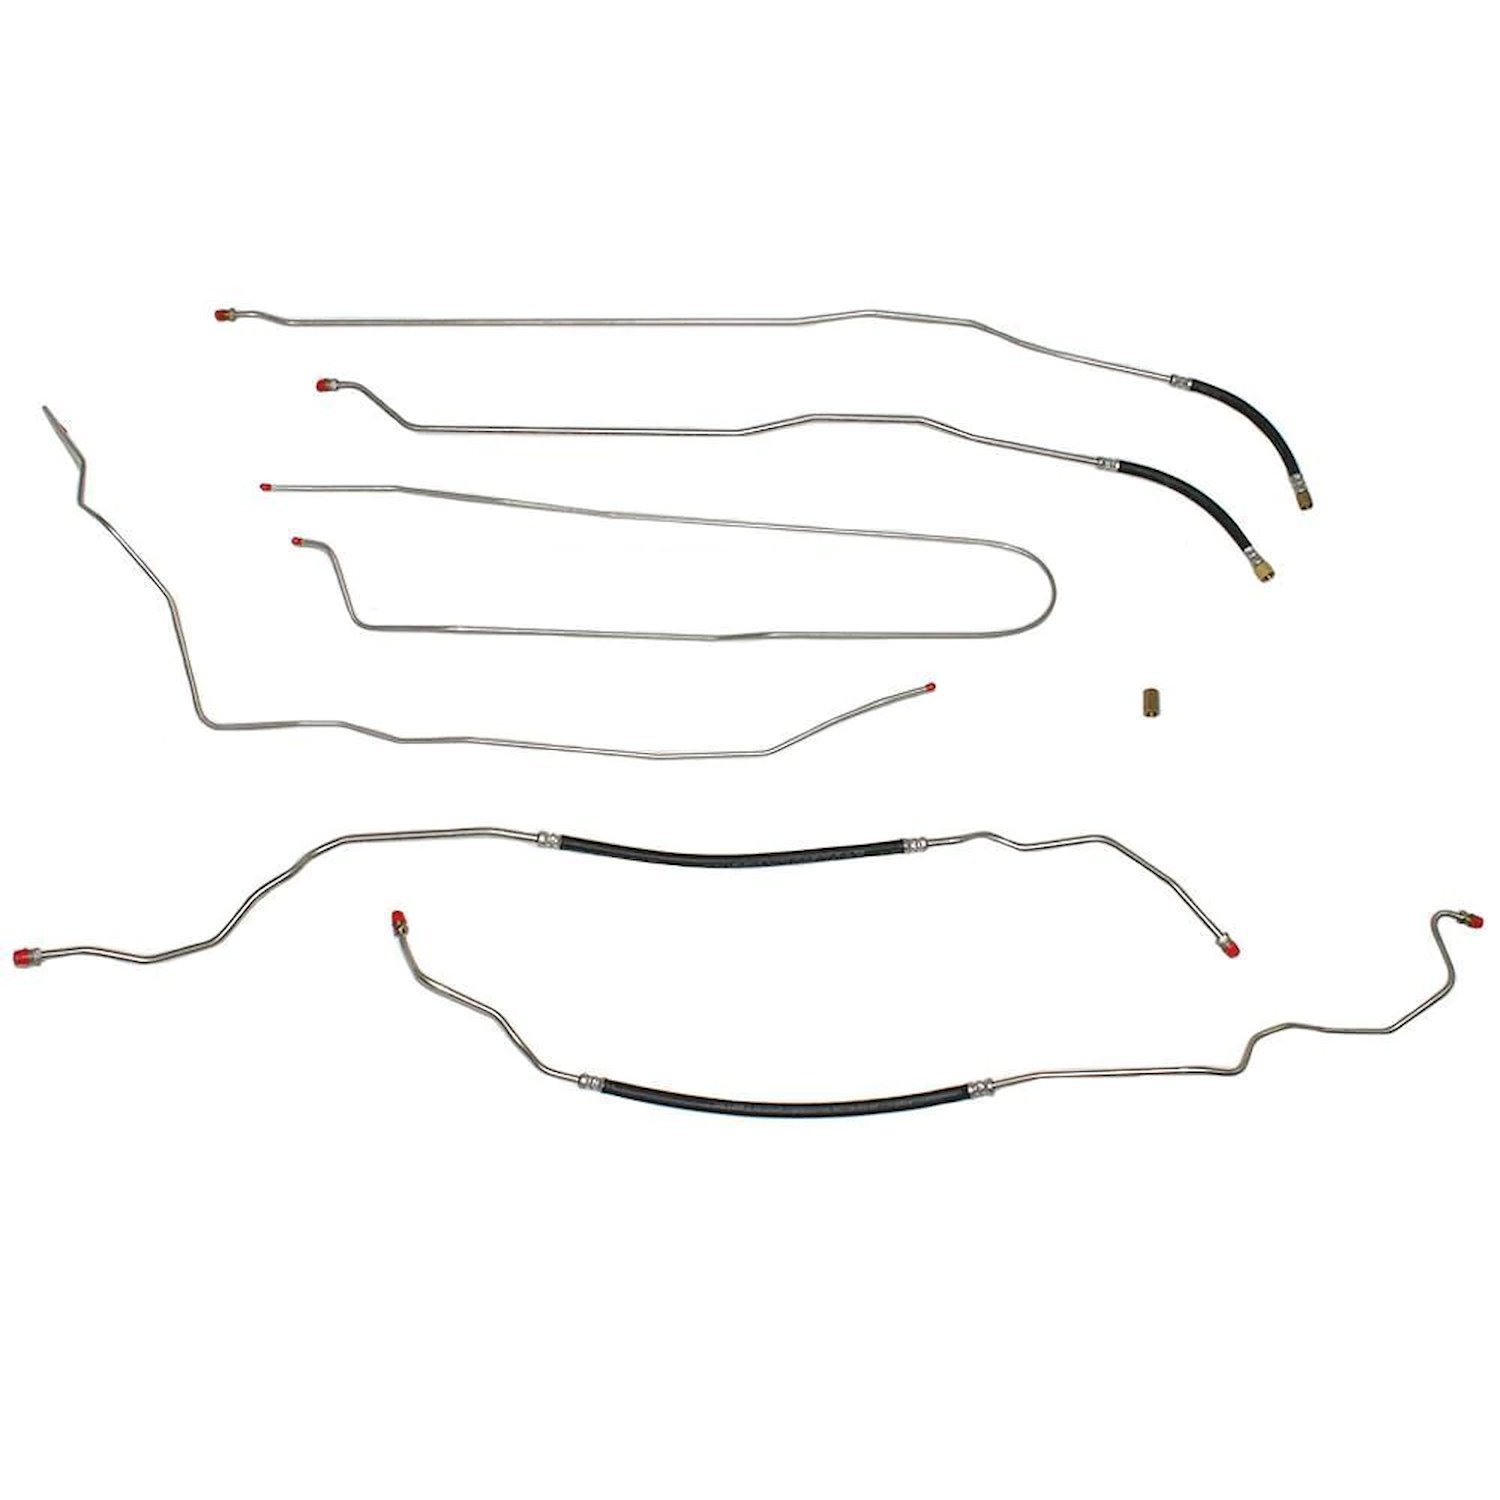 Complete Fuel Line Kit for 1998-2005 Chevy Blazer ZR2 [Stainless Steel]